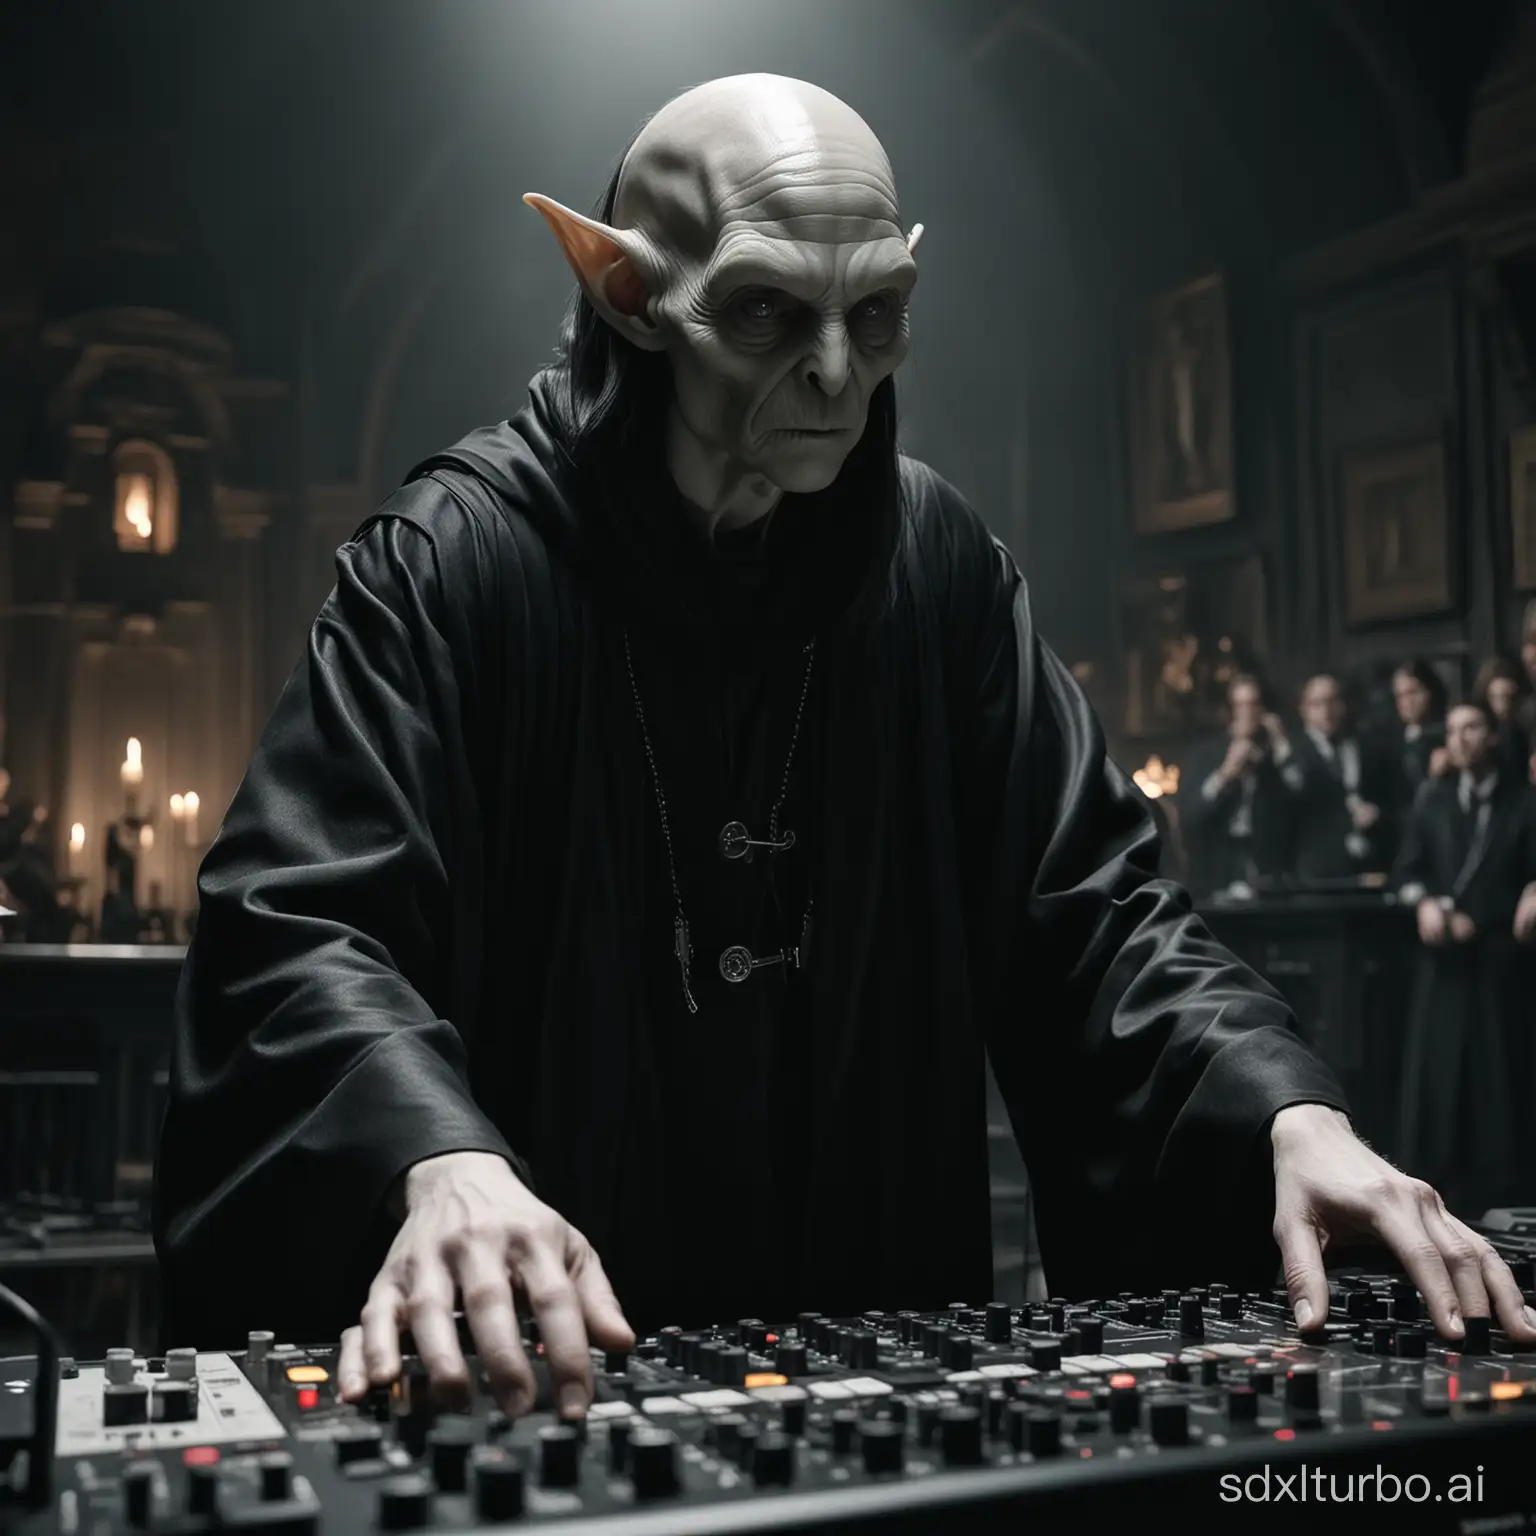 Pale white alien, playing electronic music on his Pioneer brand mixer dressed in a Slytherin house tunic, around him an electronic party at Hogwarts with many people, taking drugs, everyone dancing, ecstatic, Harry Potter movie, at a rave with Mr. Dumbledore, Ron Weasley, Mr. Snape, Voldemort, Harry Potter, all in a closed room with low lighting and a dark theme, cinematographic photography, dark techno style, all with Rick Owens' clothing and wearing black clothing, https://www.rickowens.eu/en/US, depth of field f/2.6, shutter speed 1/30, sharpness, ISO greater than 1000, photographed in black and white/desaturated, at night, long shot, chopped shot, photo taken from the front, perfect composition, 8k, sharpness, intricate and incredibly detailed, which is a trend in the creation of art, hyper-realistic photography, cinematographic, art, Harry Potter, 8k, perfect,